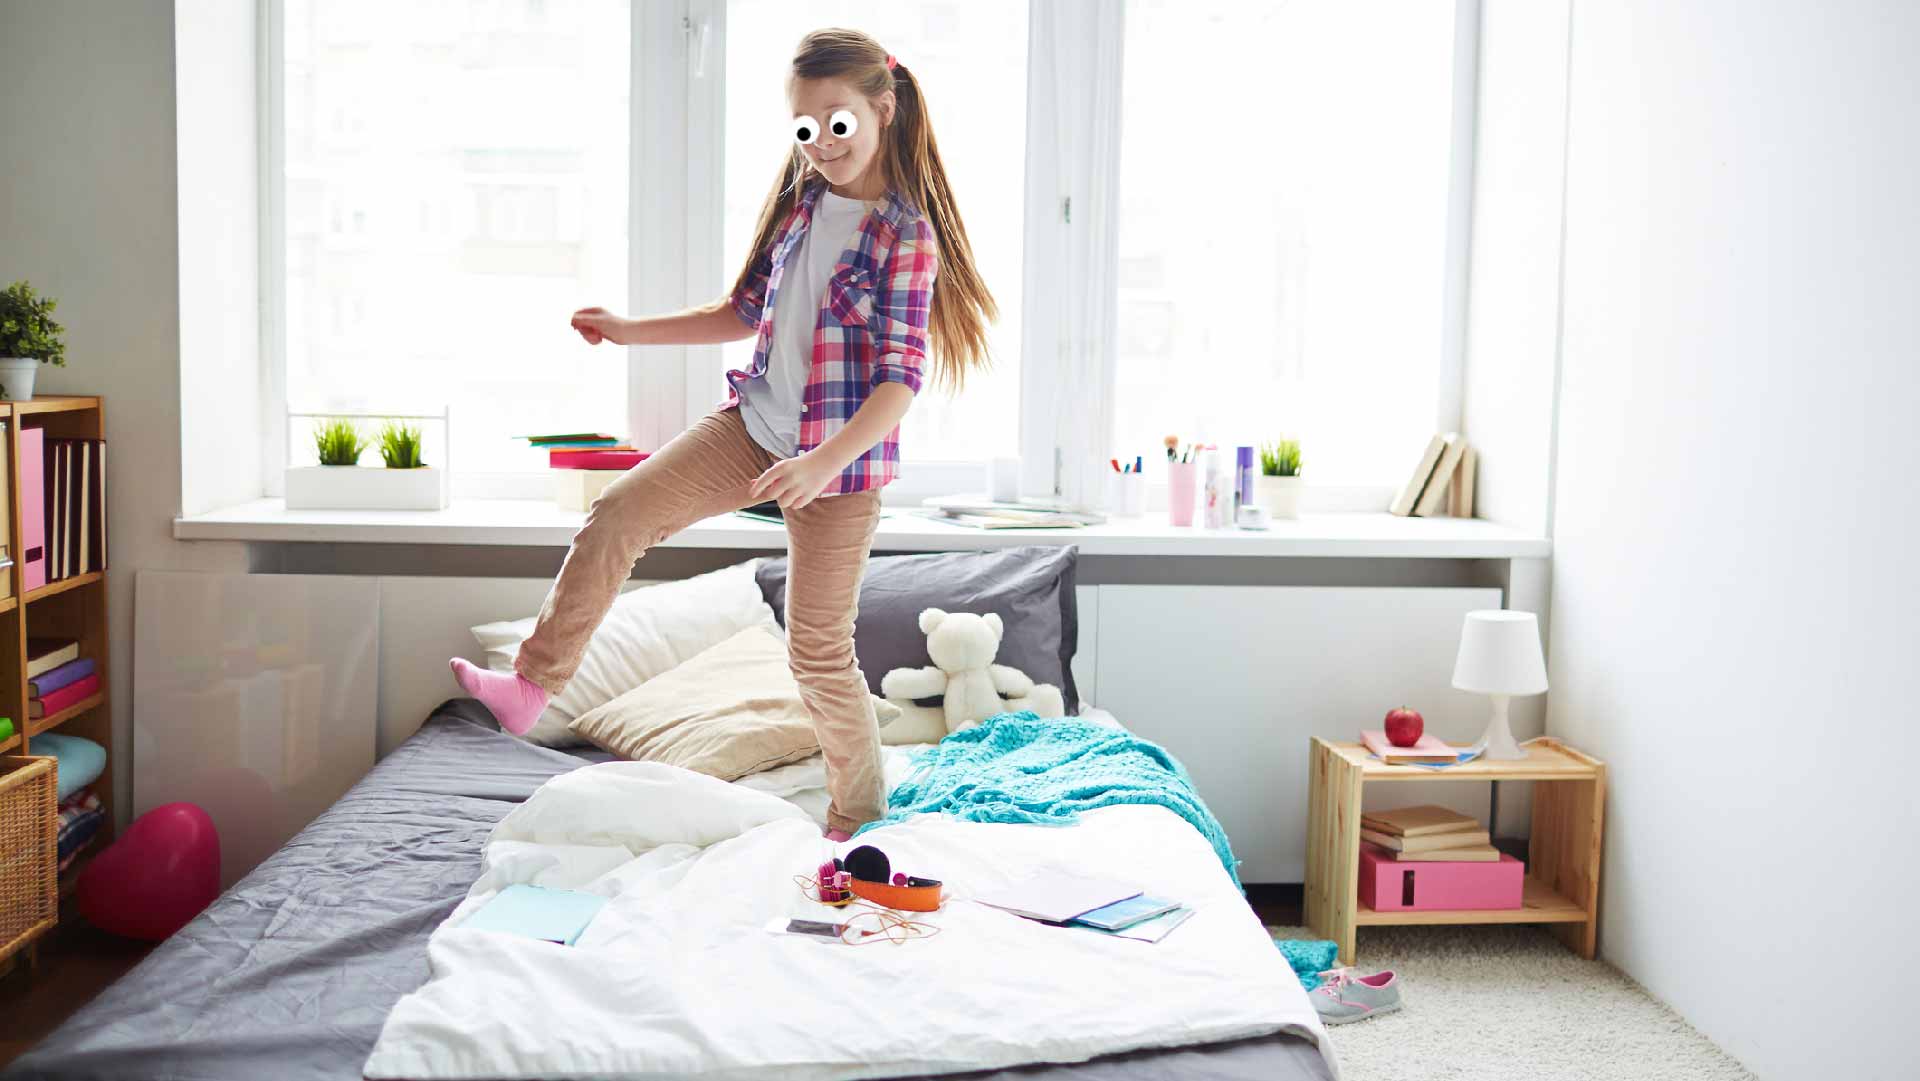 A child jumping on a bed in a tidy room